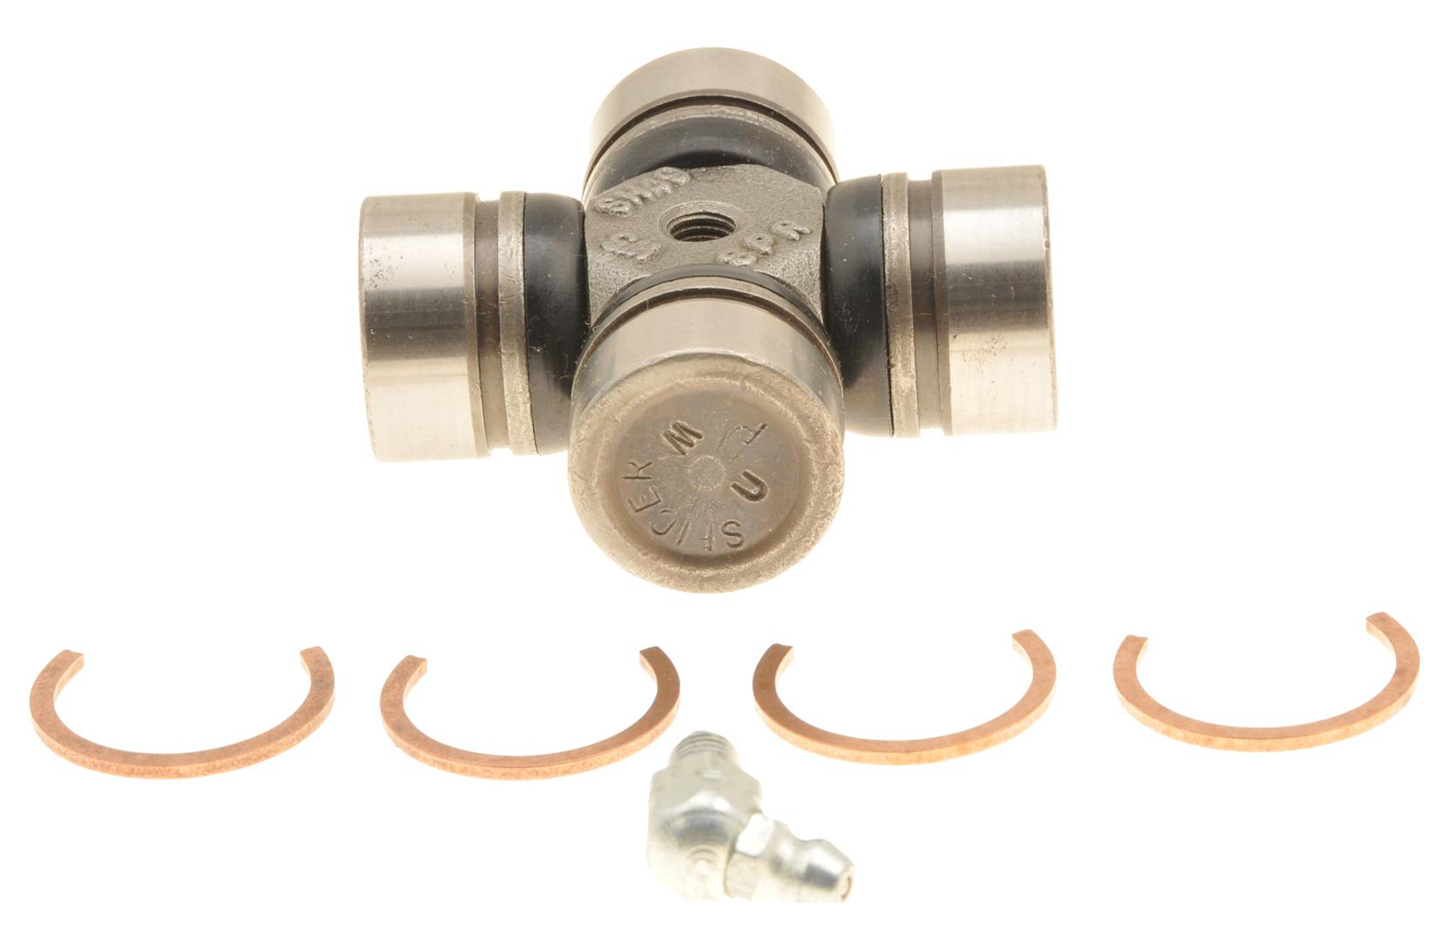 Dana-Spicer 5-170X - Universal Joint, 1000 Series, 0.938 in Bearing Caps, Clips Included, Greasable, Steel, Natural, Each